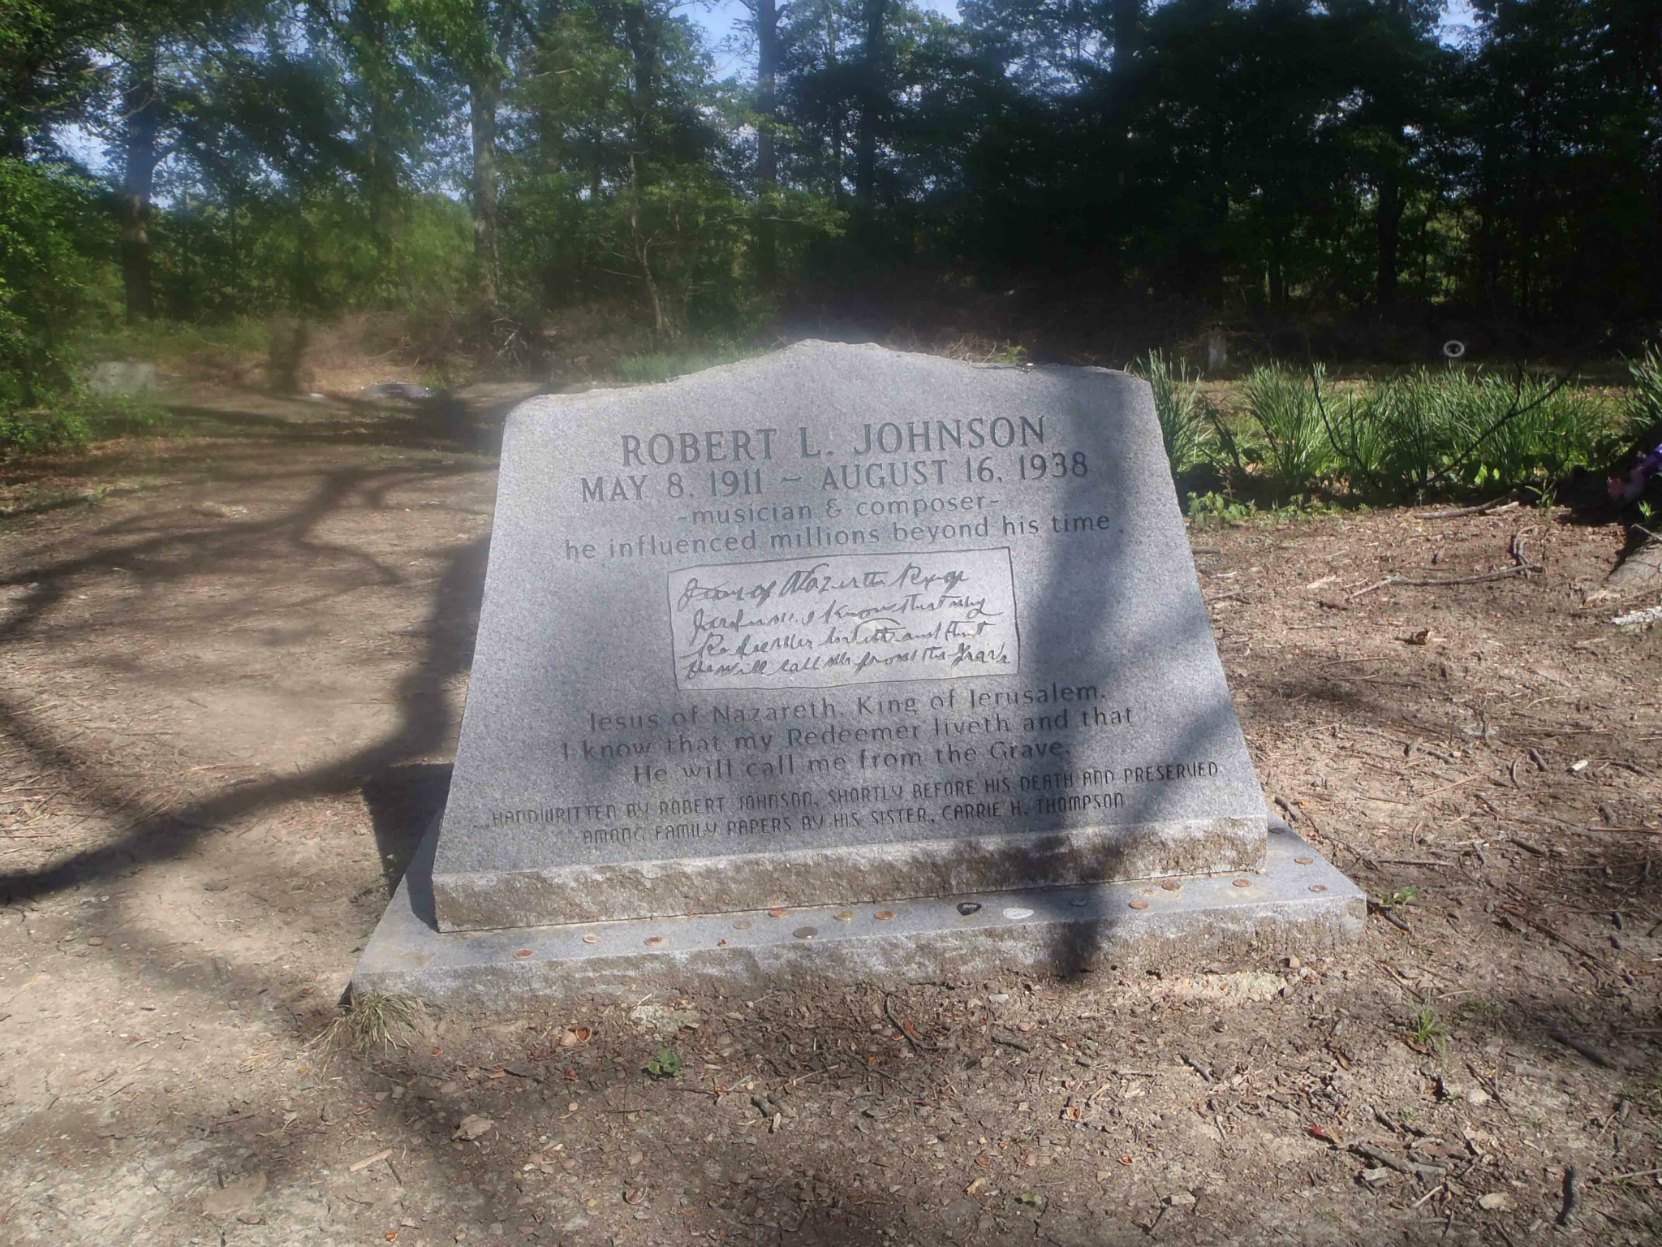 Robert Johnson grave in Little Zion Missionary Baptist Church cemetery, near Money, Leflore County, Mississippi, site of one of three reputed Robert Johnson grave sites.